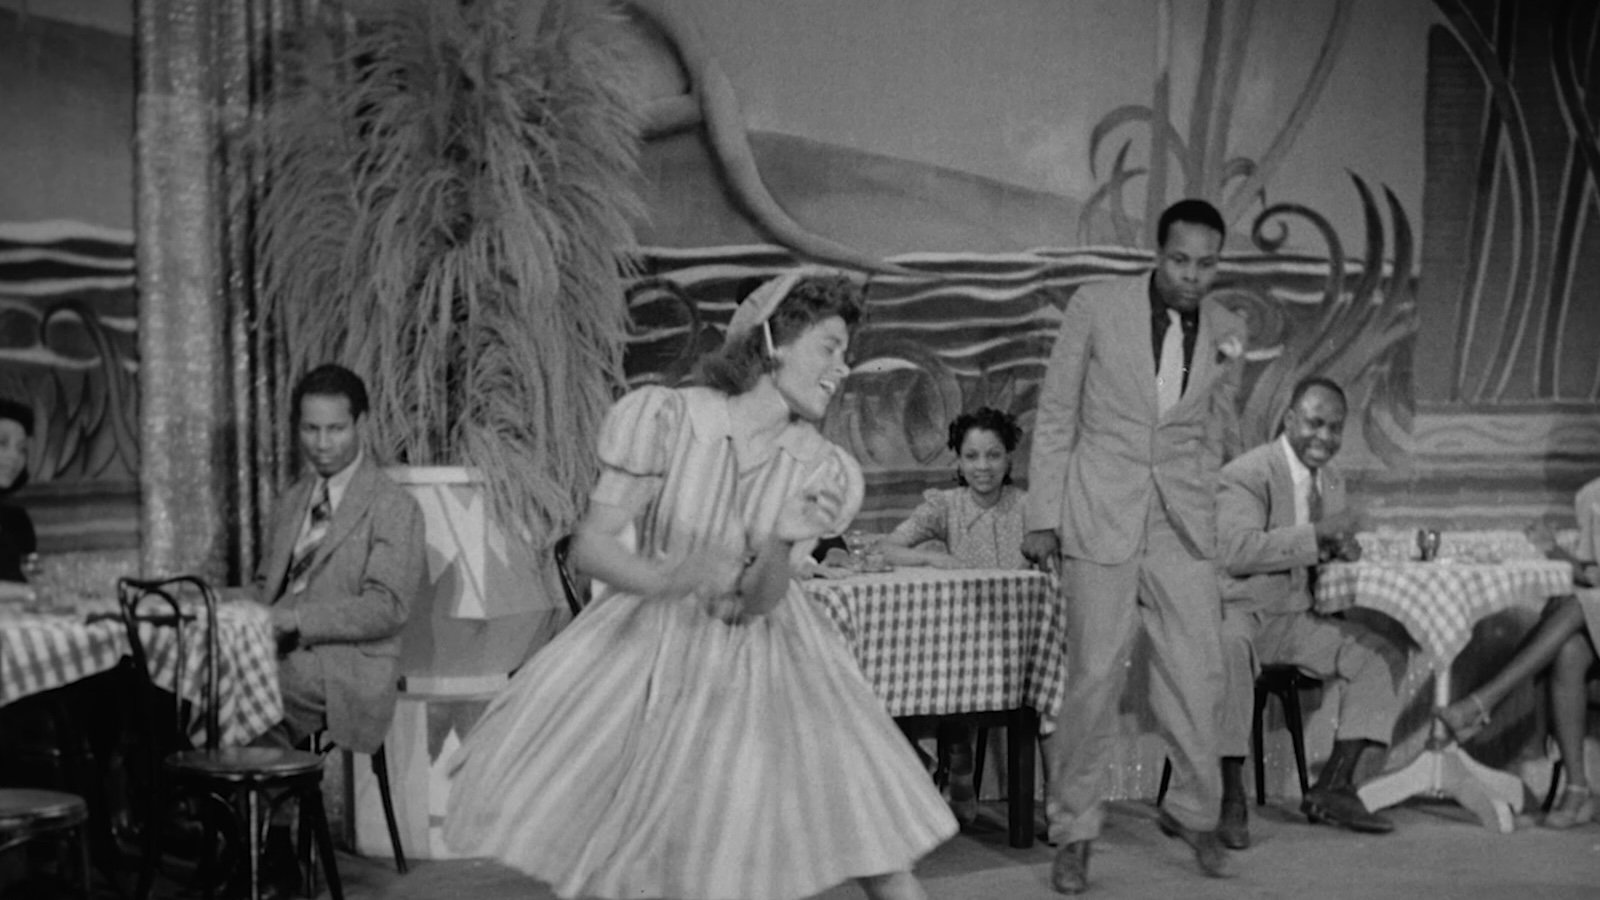 Black and white image from the 1940s of a woman in a dress dancing in a cafe while men look at her; one in a suit is standing, the others are sitting.